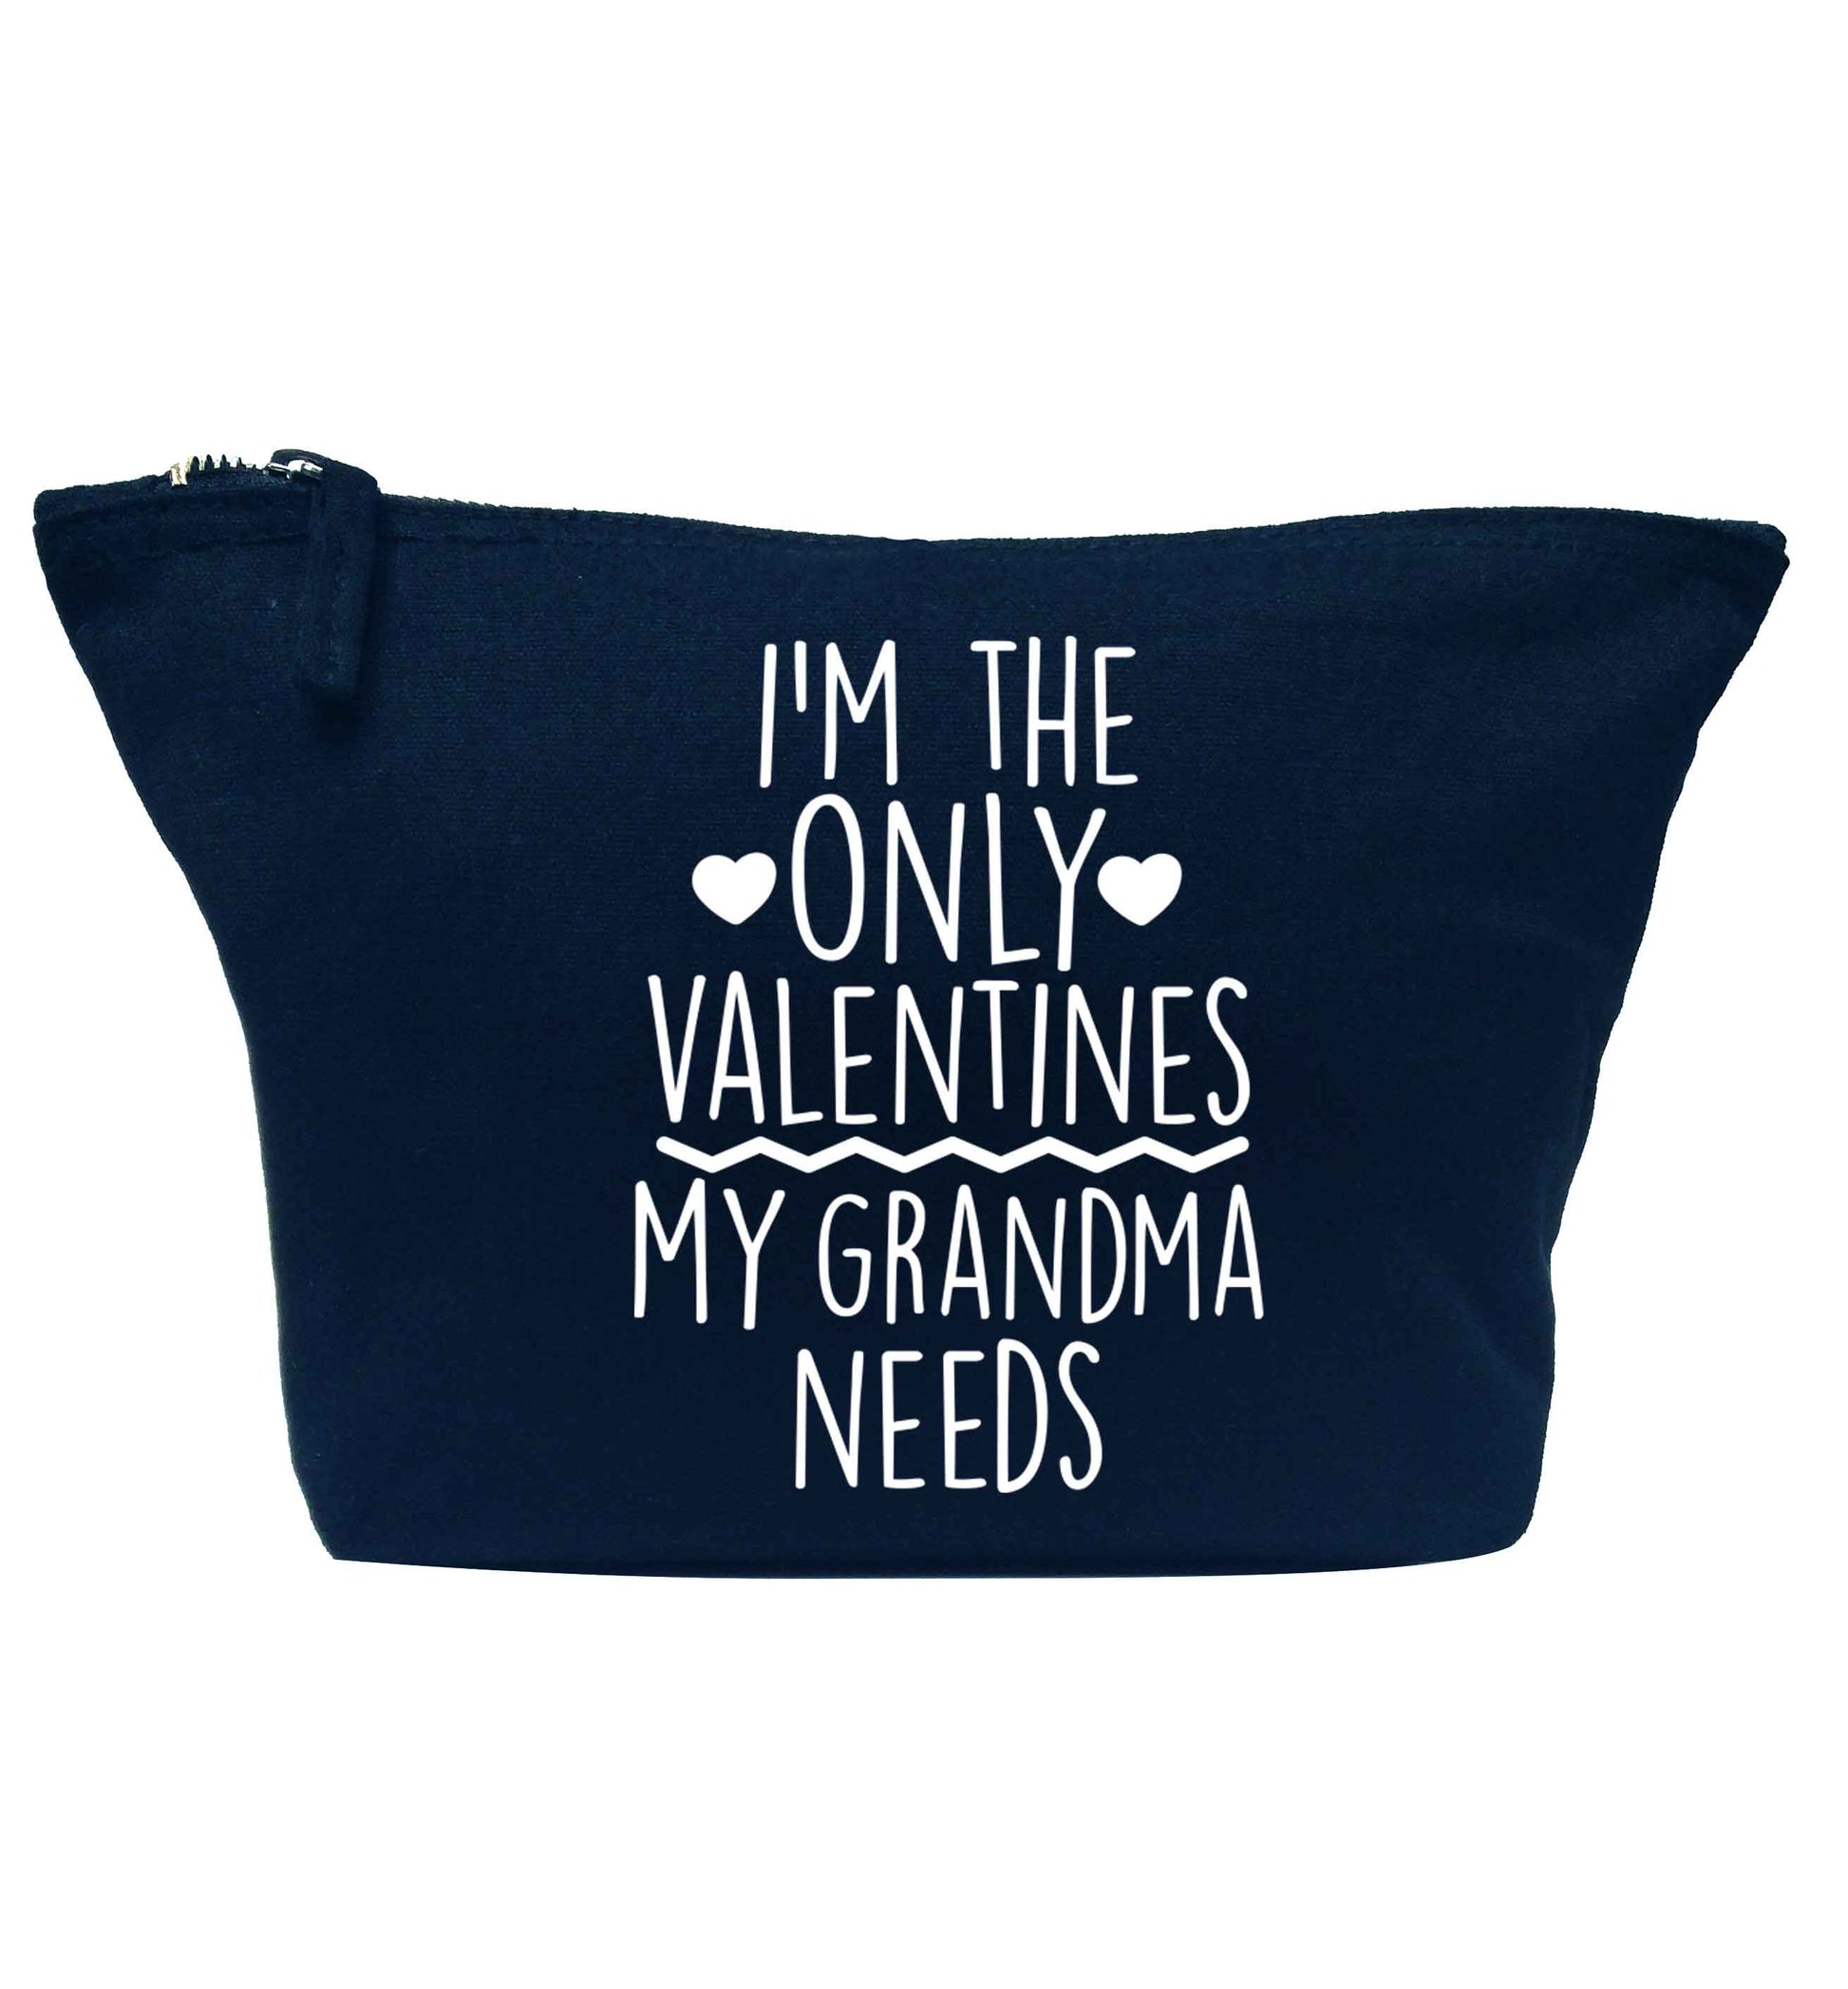 I'm the only valentines my grandma needs navy makeup bag